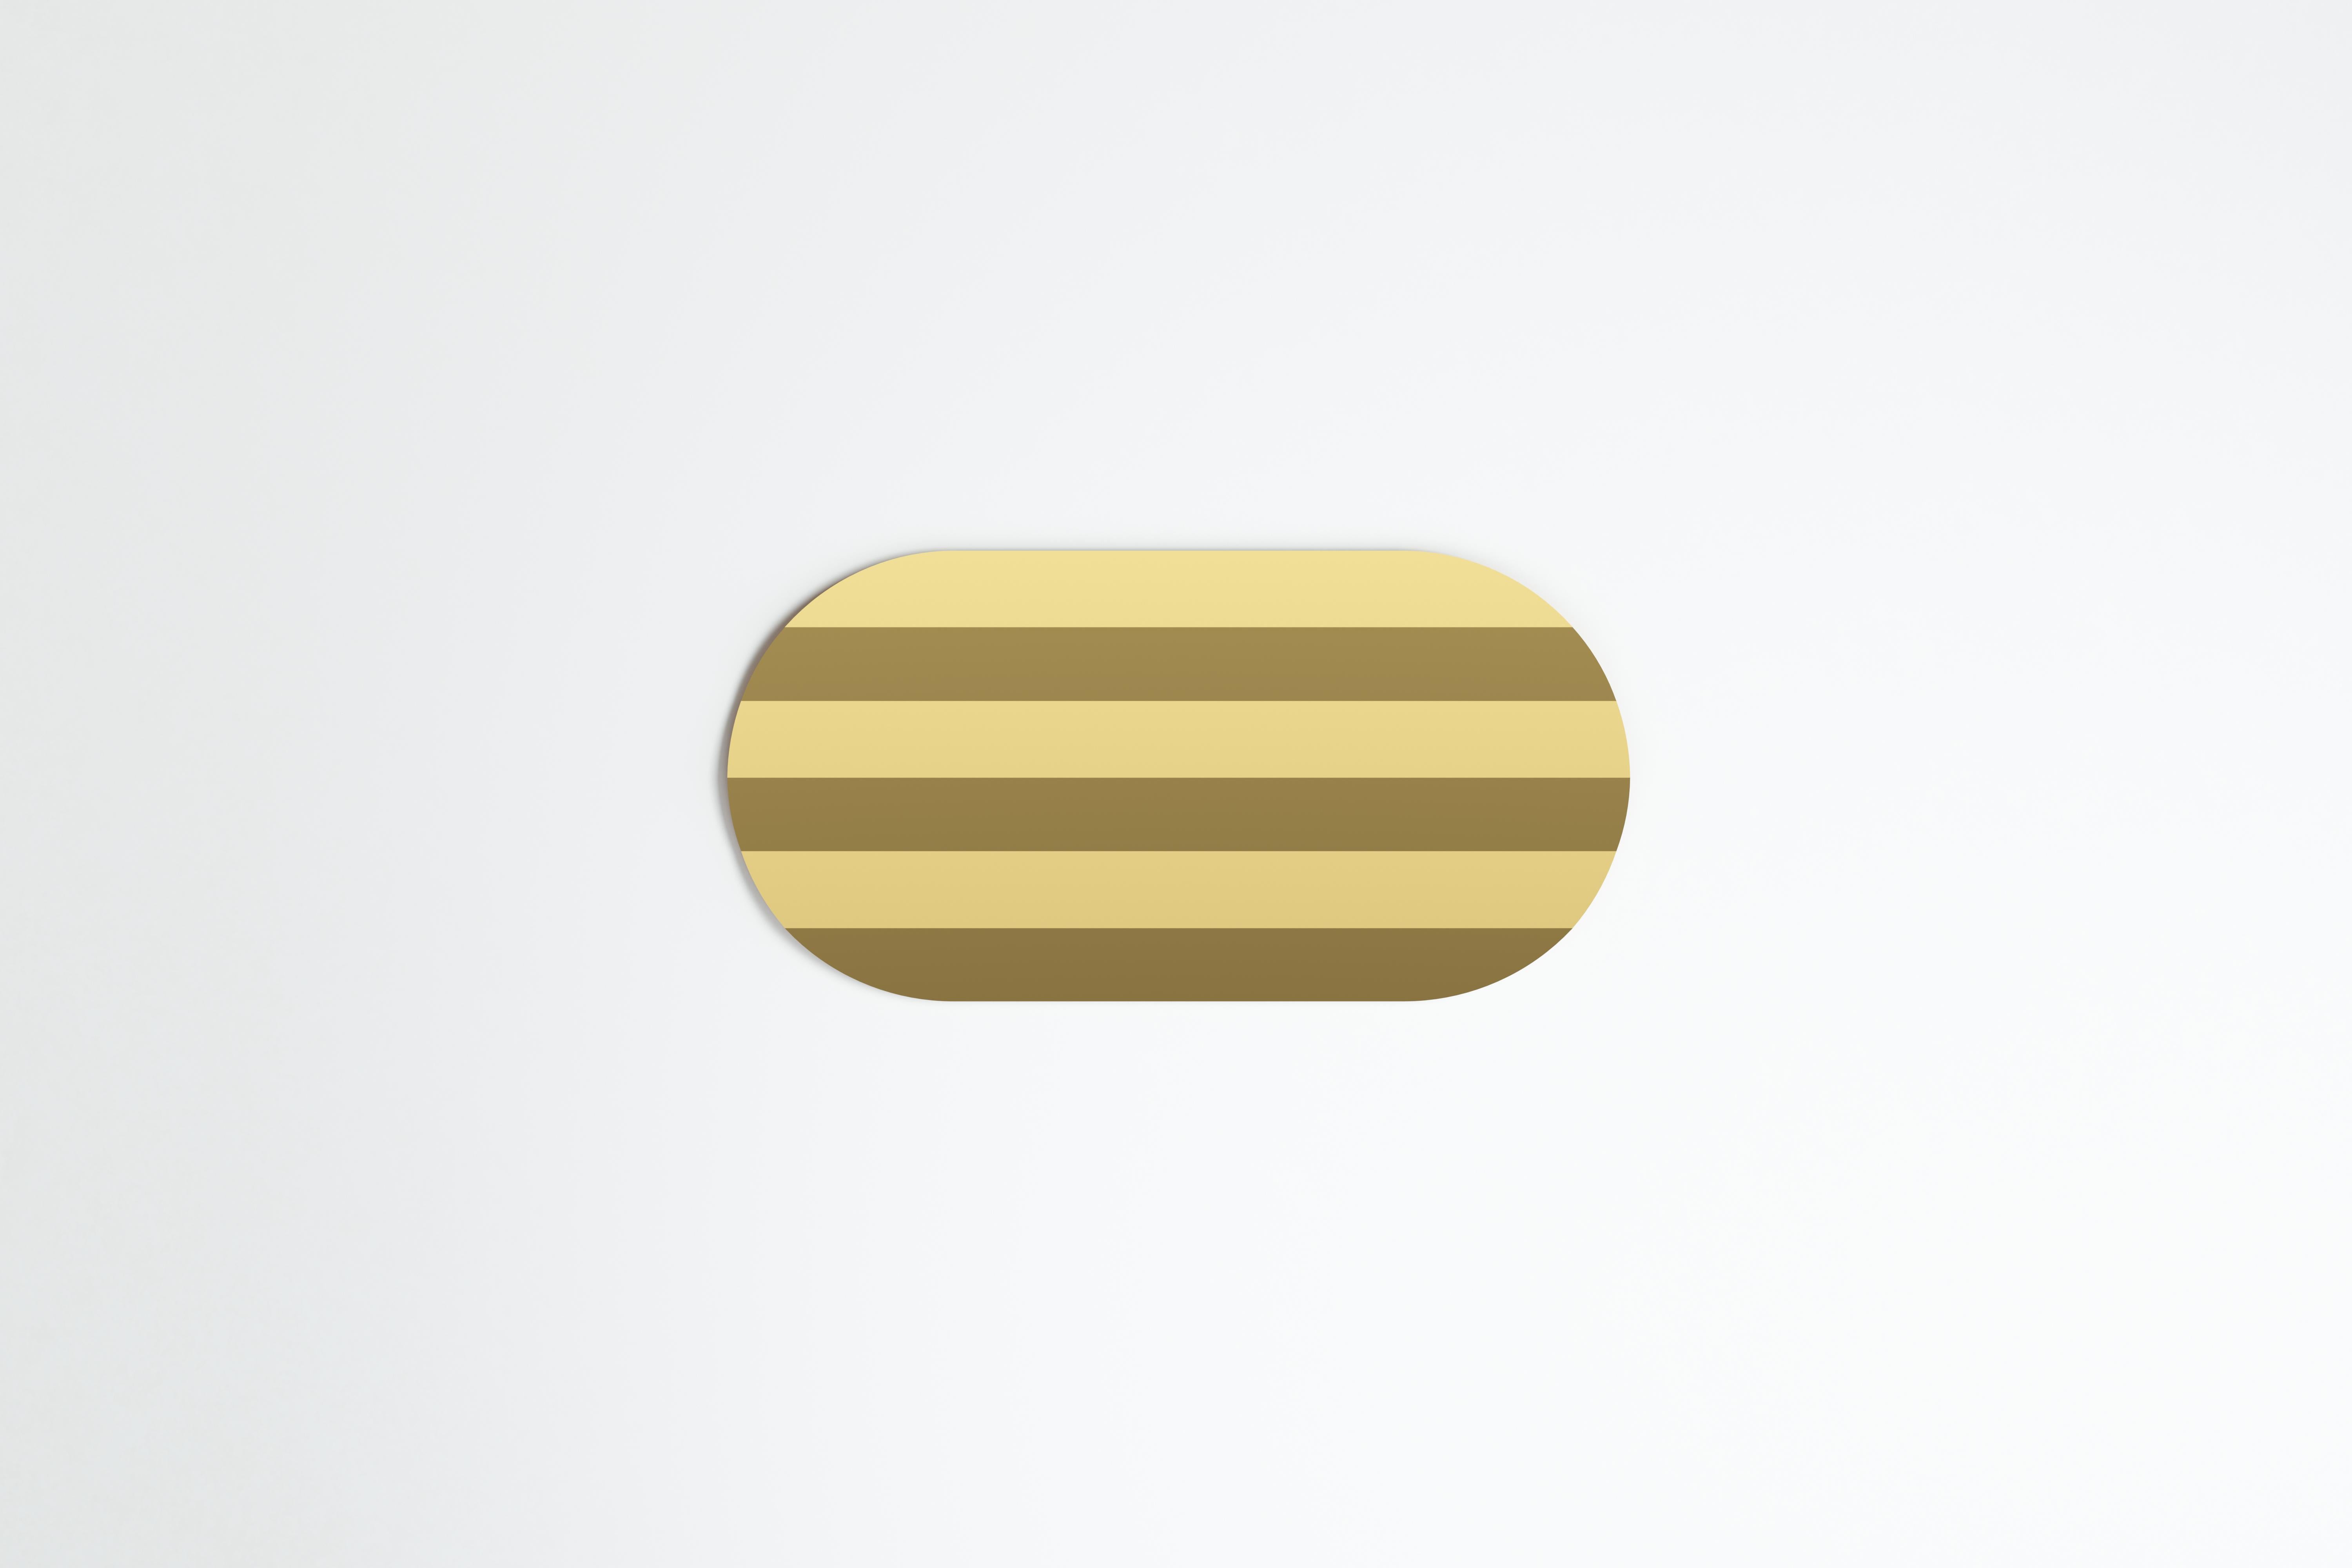 Stripe oblong 120 mirror by Sebastian Scherer
Dimensions: D60 x H120 cm
Materials: Stainless steel, wood board (bracket).
Weight: 7.3 kg.
Also Available: Colours: Mirror Silver (stainless steel), mirror gold (brass coated stainless steel /